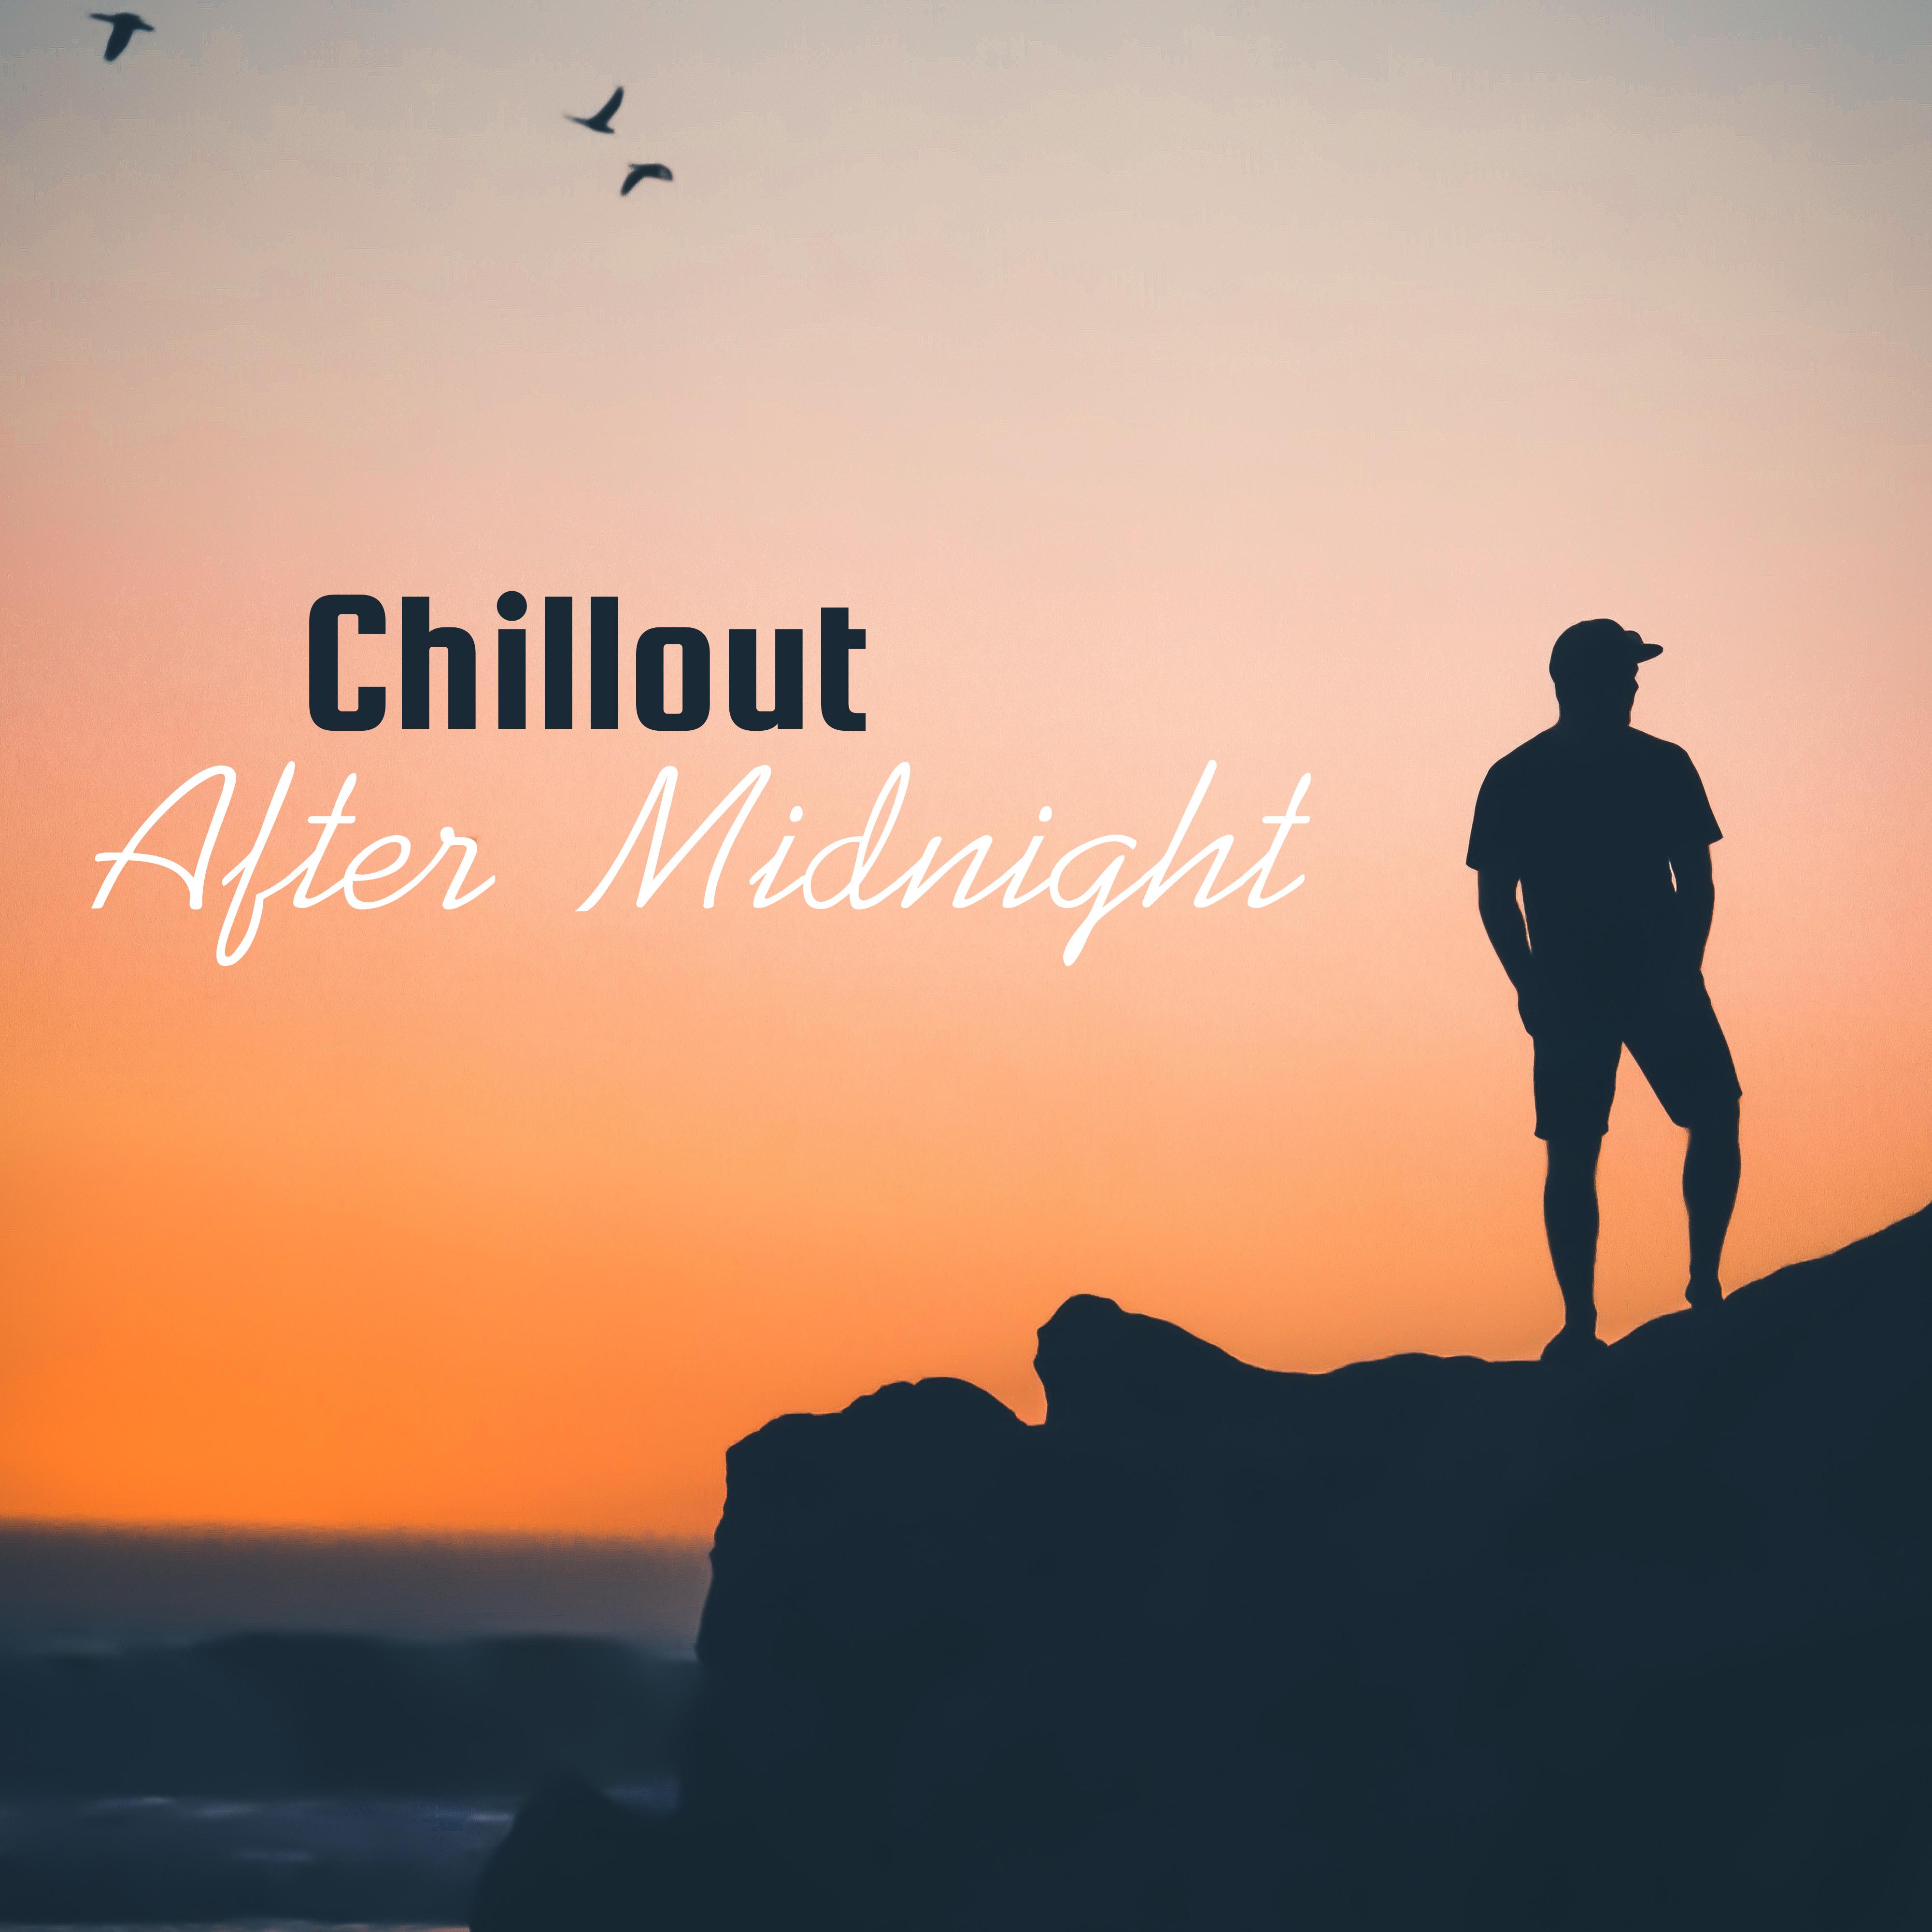 Chillout After Midnight  New Chill Out Music, Chillout Lounge, Deep Relaxation, Good Vibes